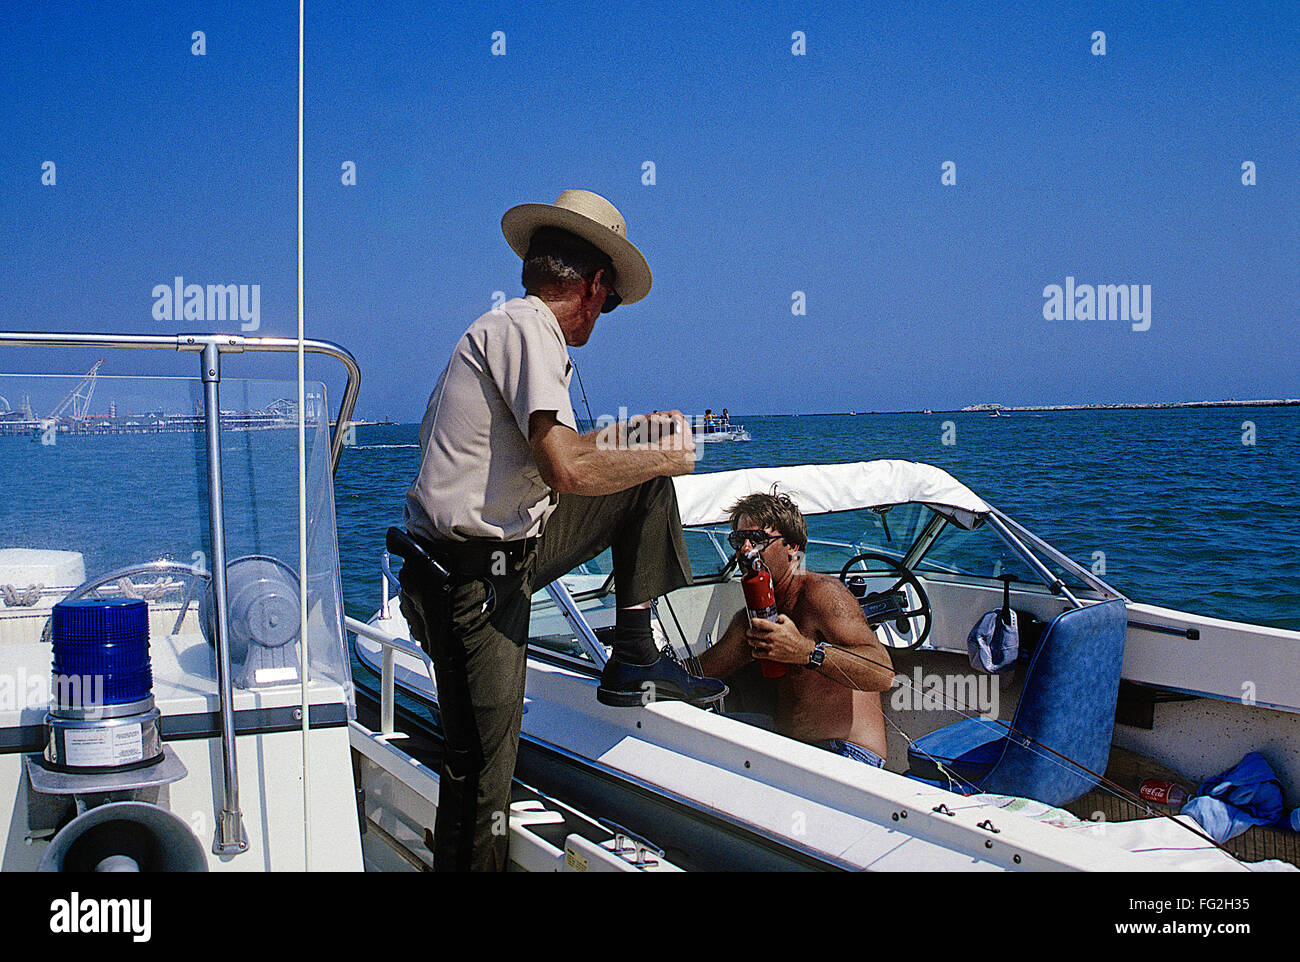 Ocean City, Maryland, USA, 23rd, July 1987 Officer Norman Mills of the Maryland Natural Resources marine unit conducts safe boating inspections while patrolling the waters of the Isle of Wight Bay on the west side of Ocean City Md.  Credit: Mark Reinstein Stock Photo